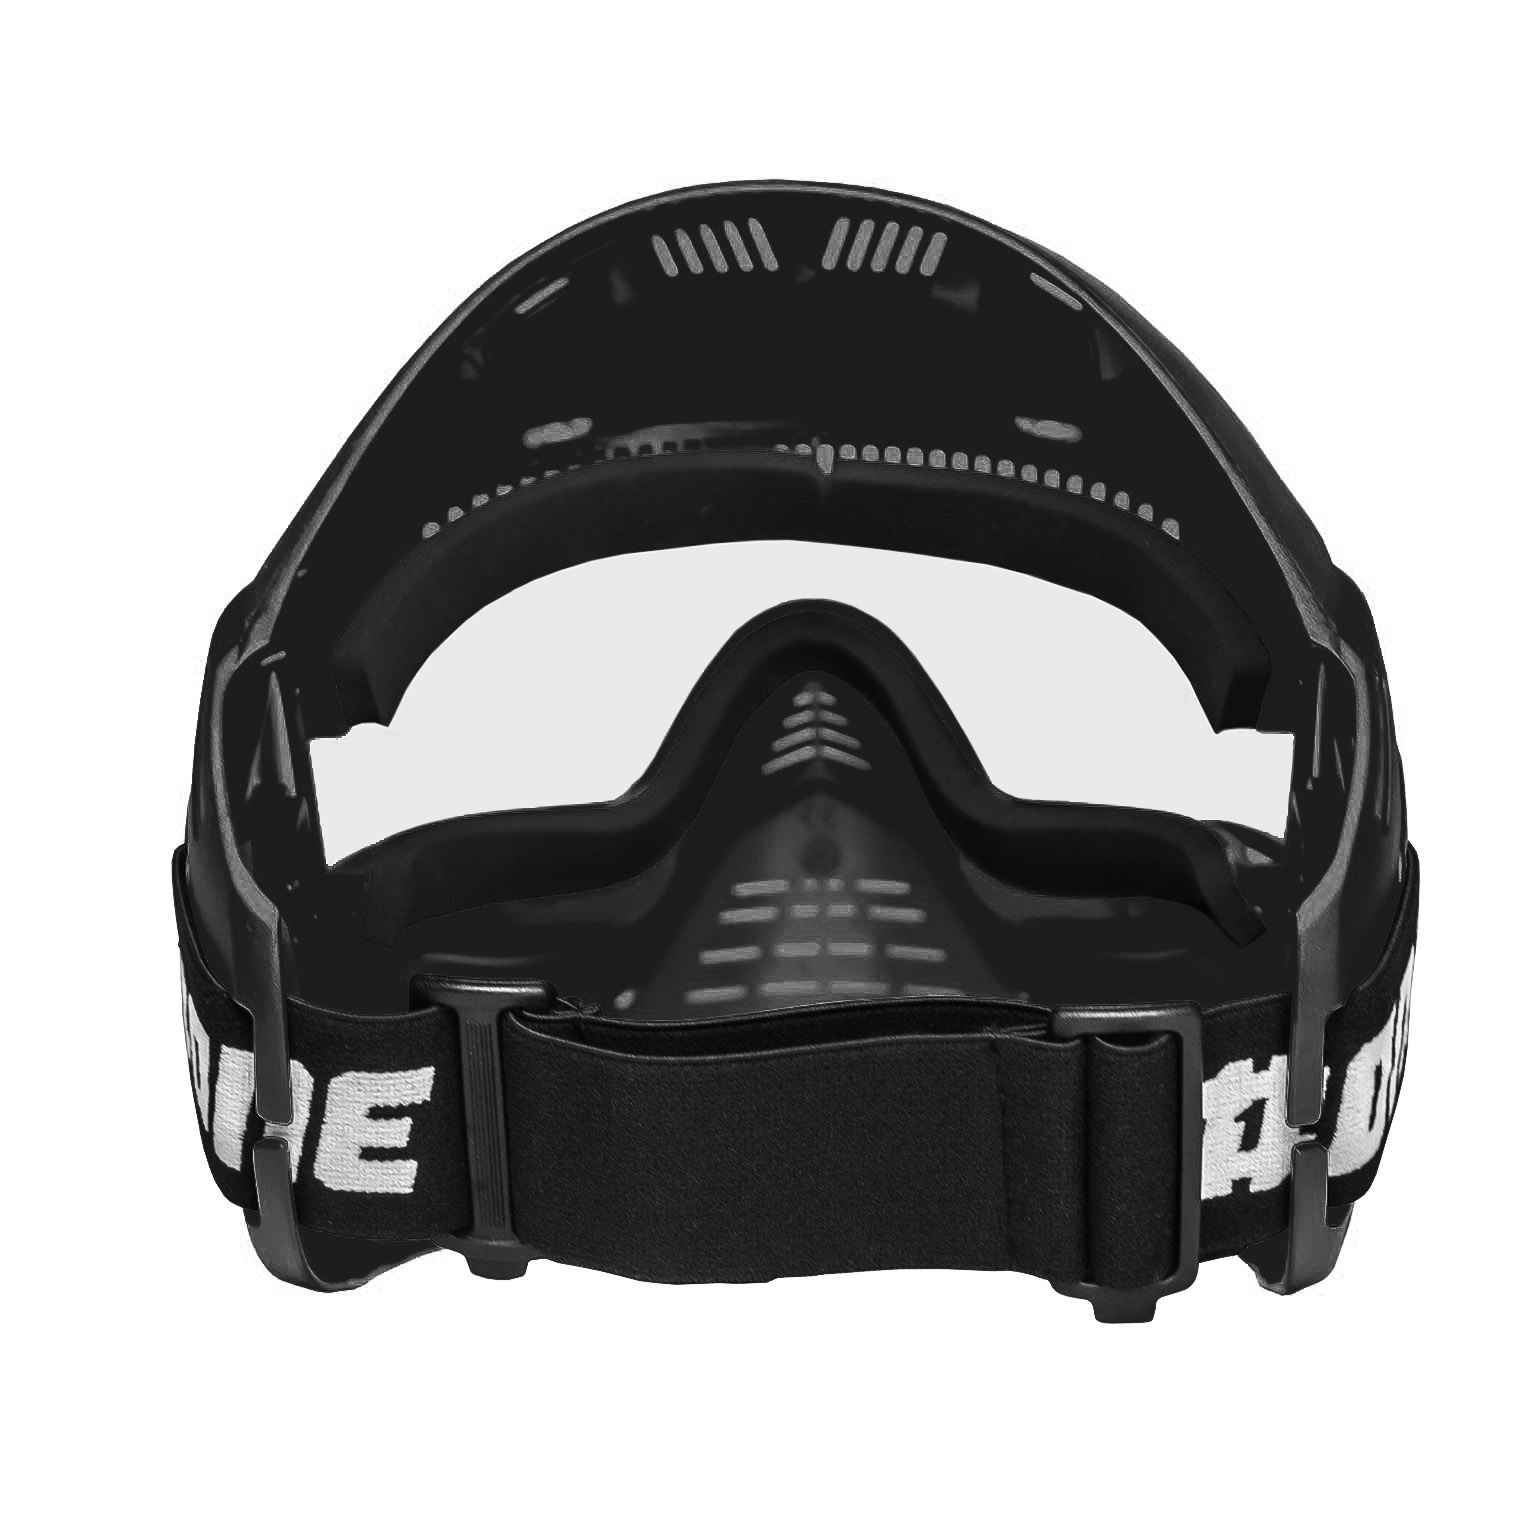 FIELDpb ONE Goggle Black (Thermal Lens) Rubber Foam